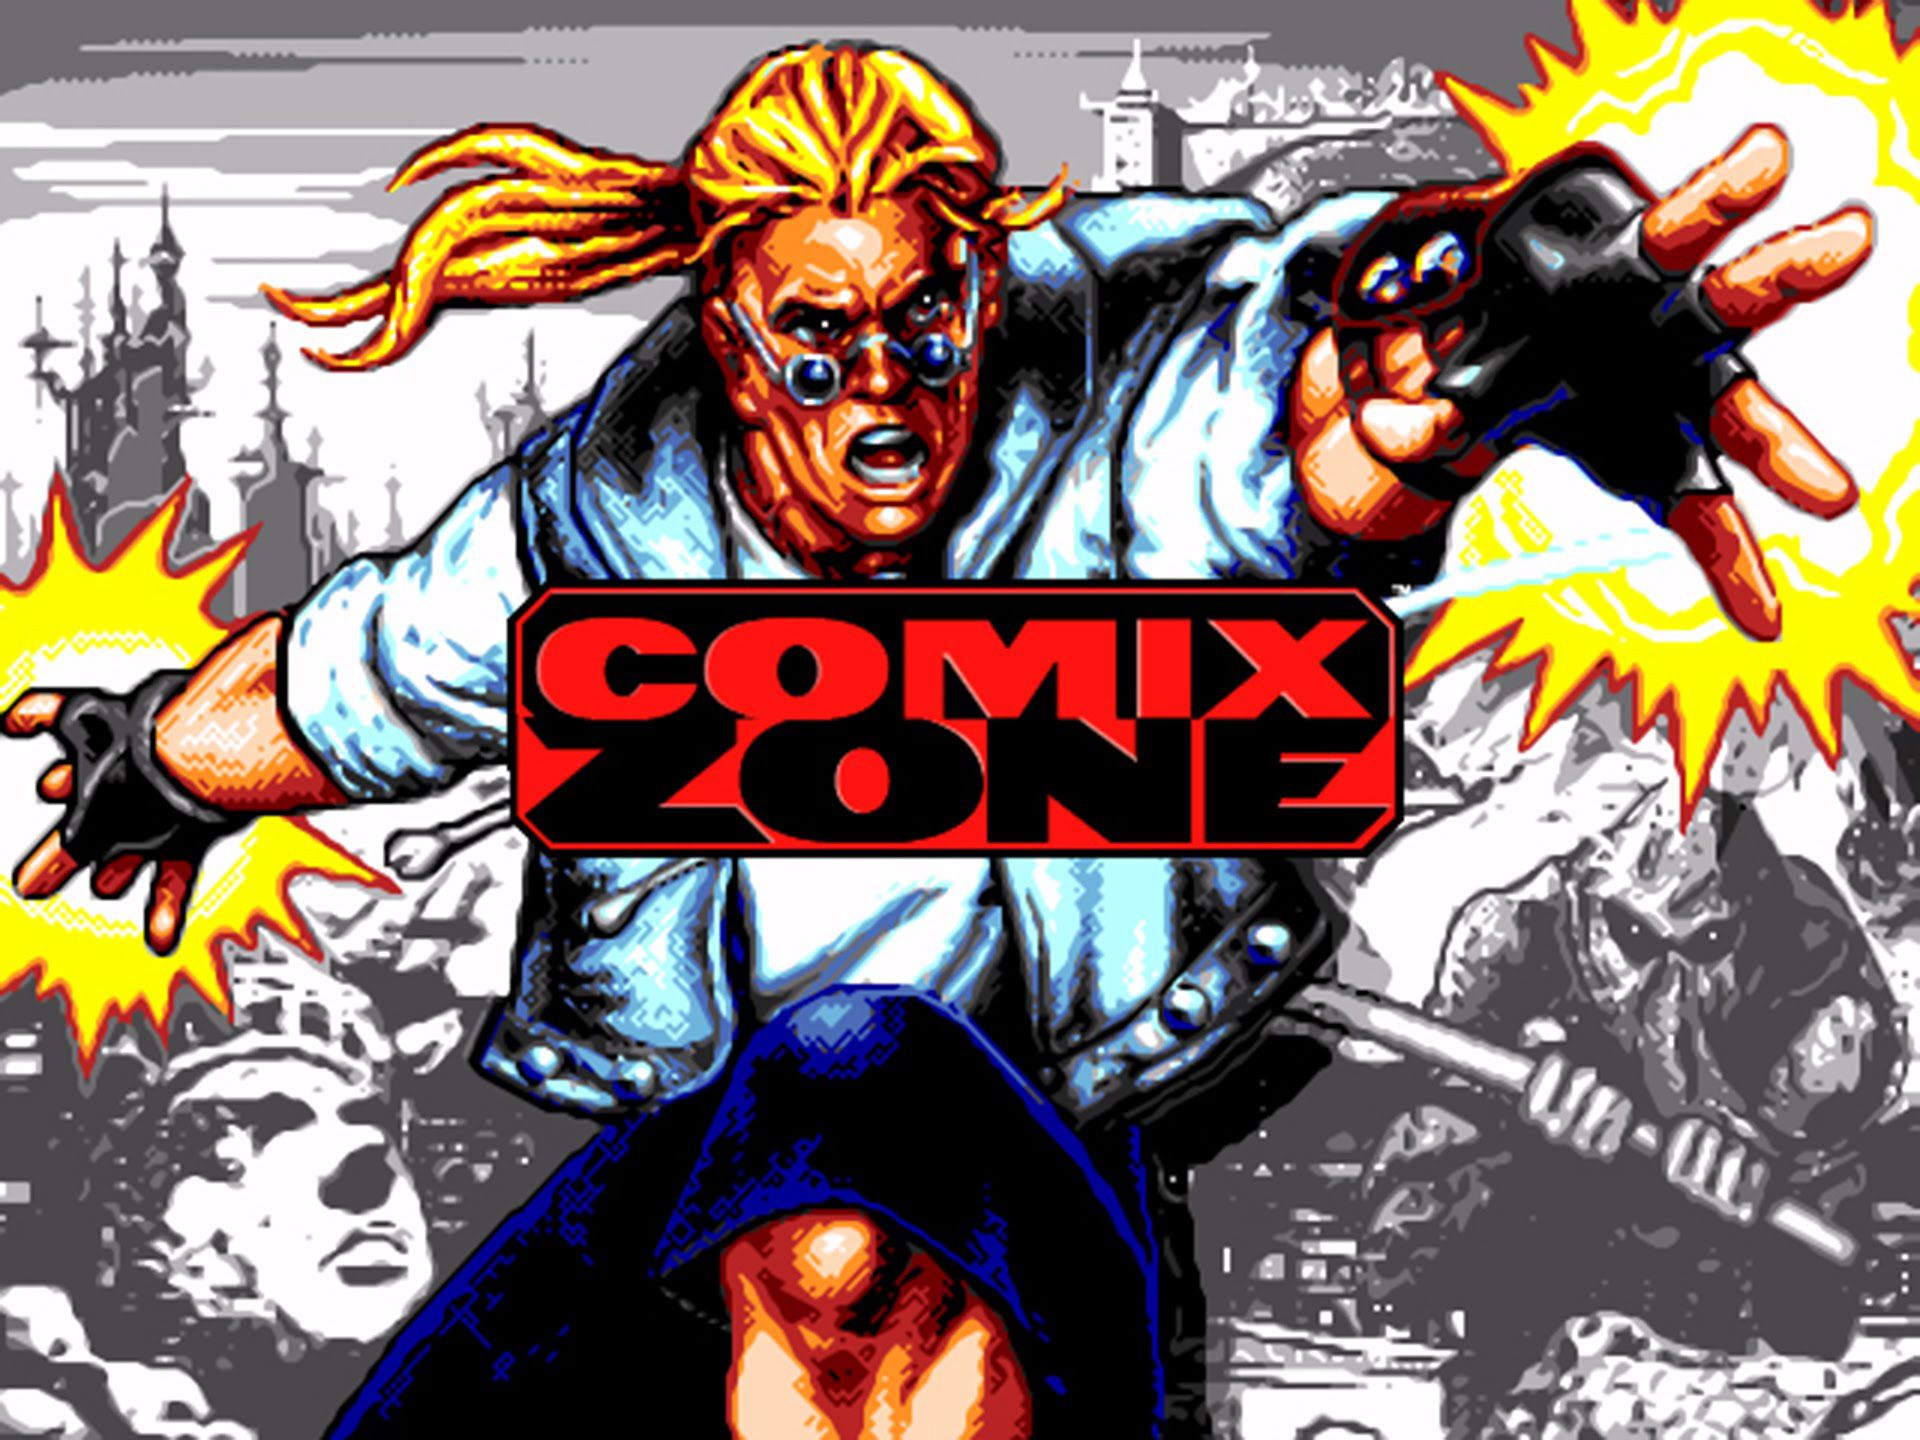 Do you remember?: Comix Zone